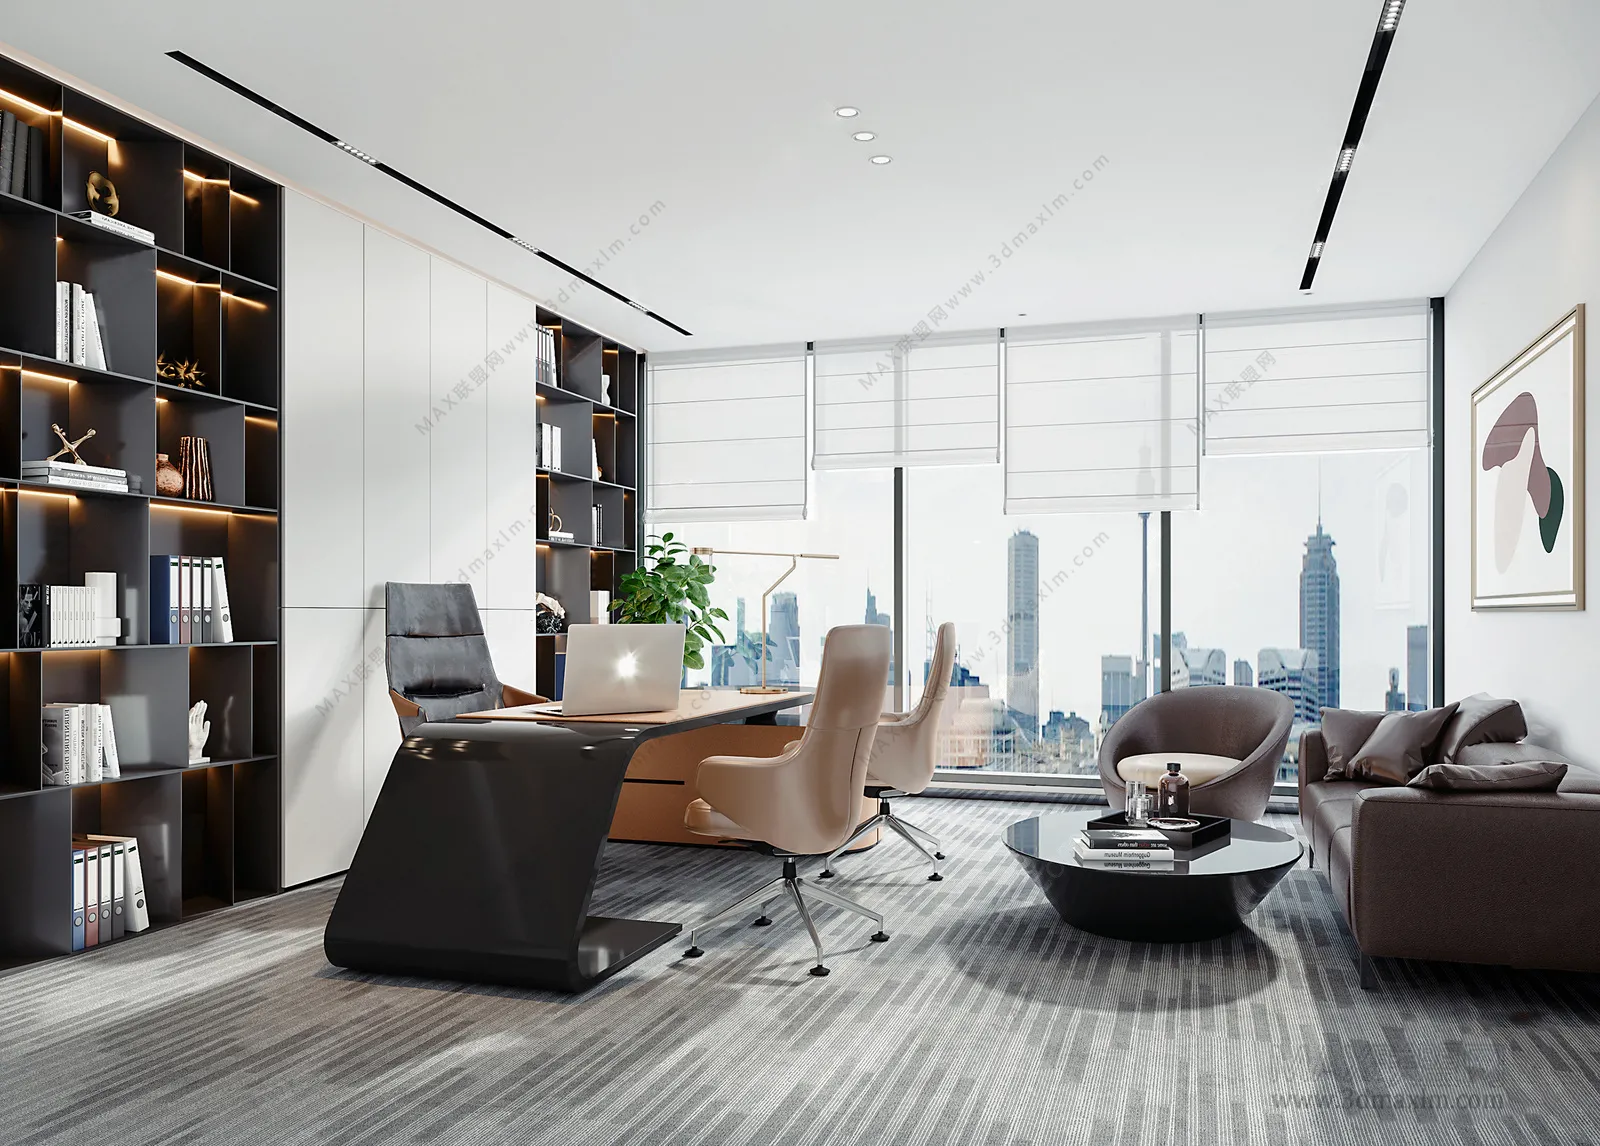 3D OFFICE INTERIOR (VRAY) – MANAGER ROOM 3D SCENES – 007